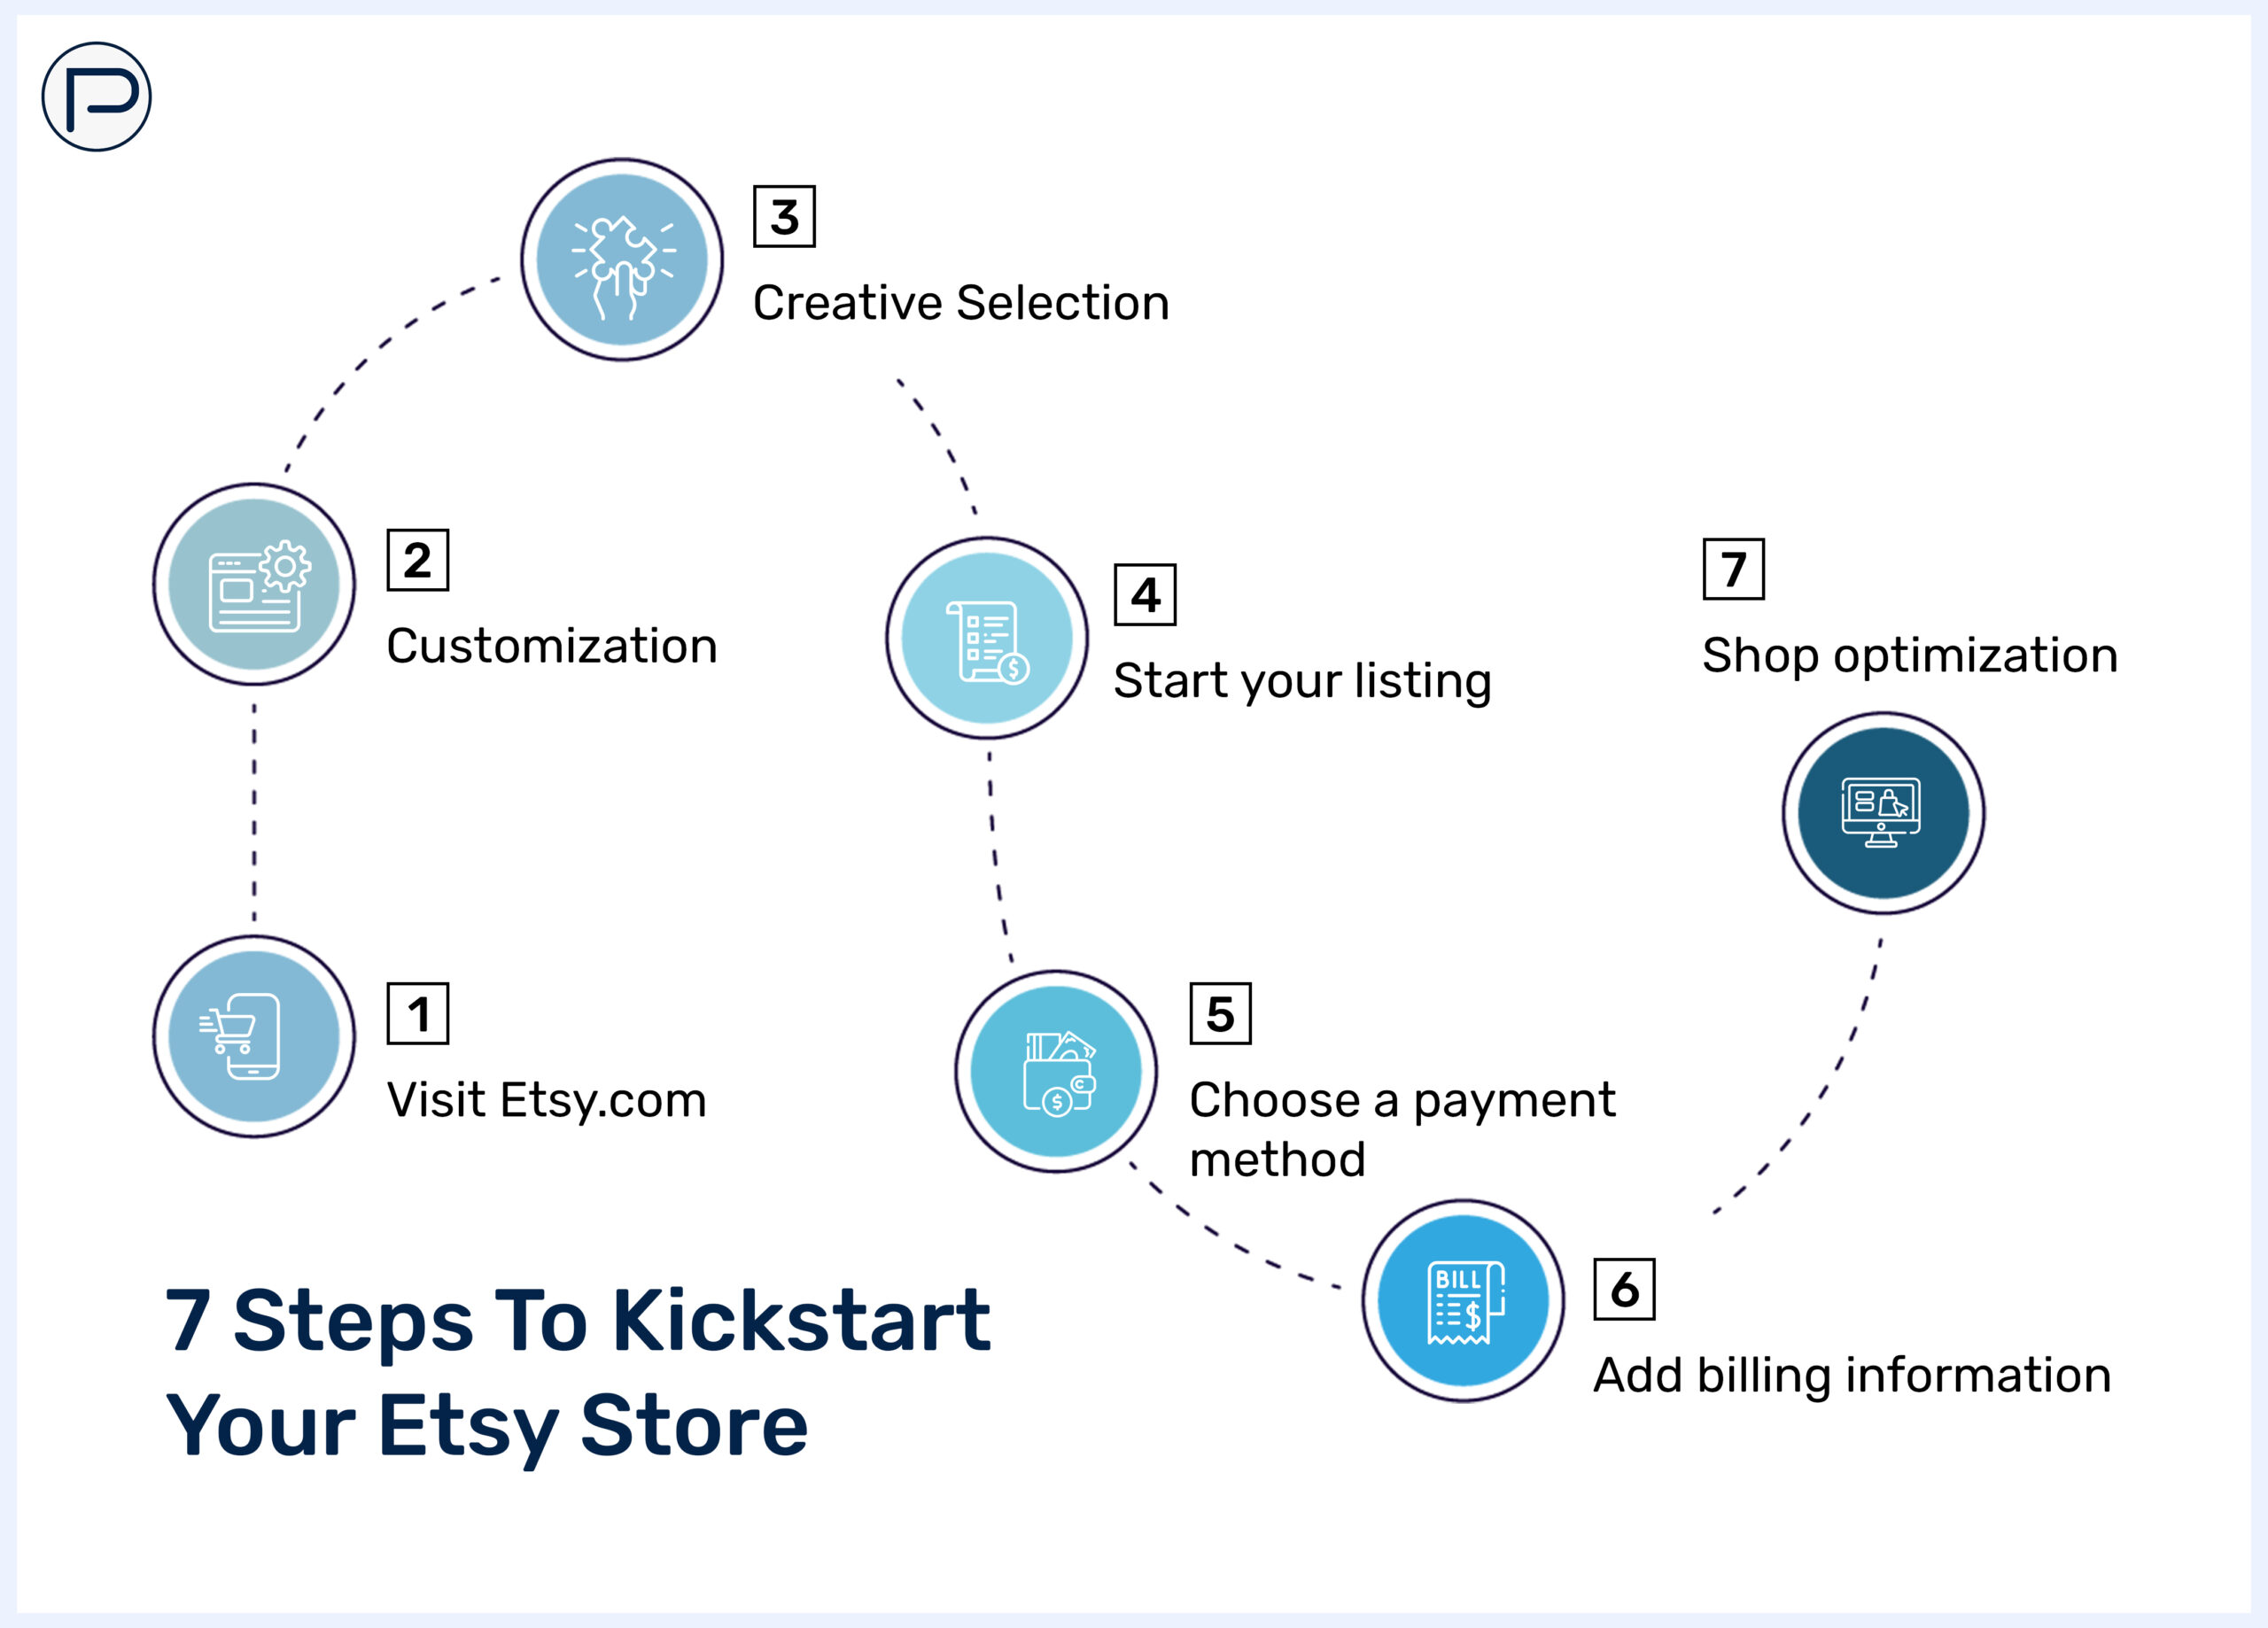 7 steps to kickstart your etsy store